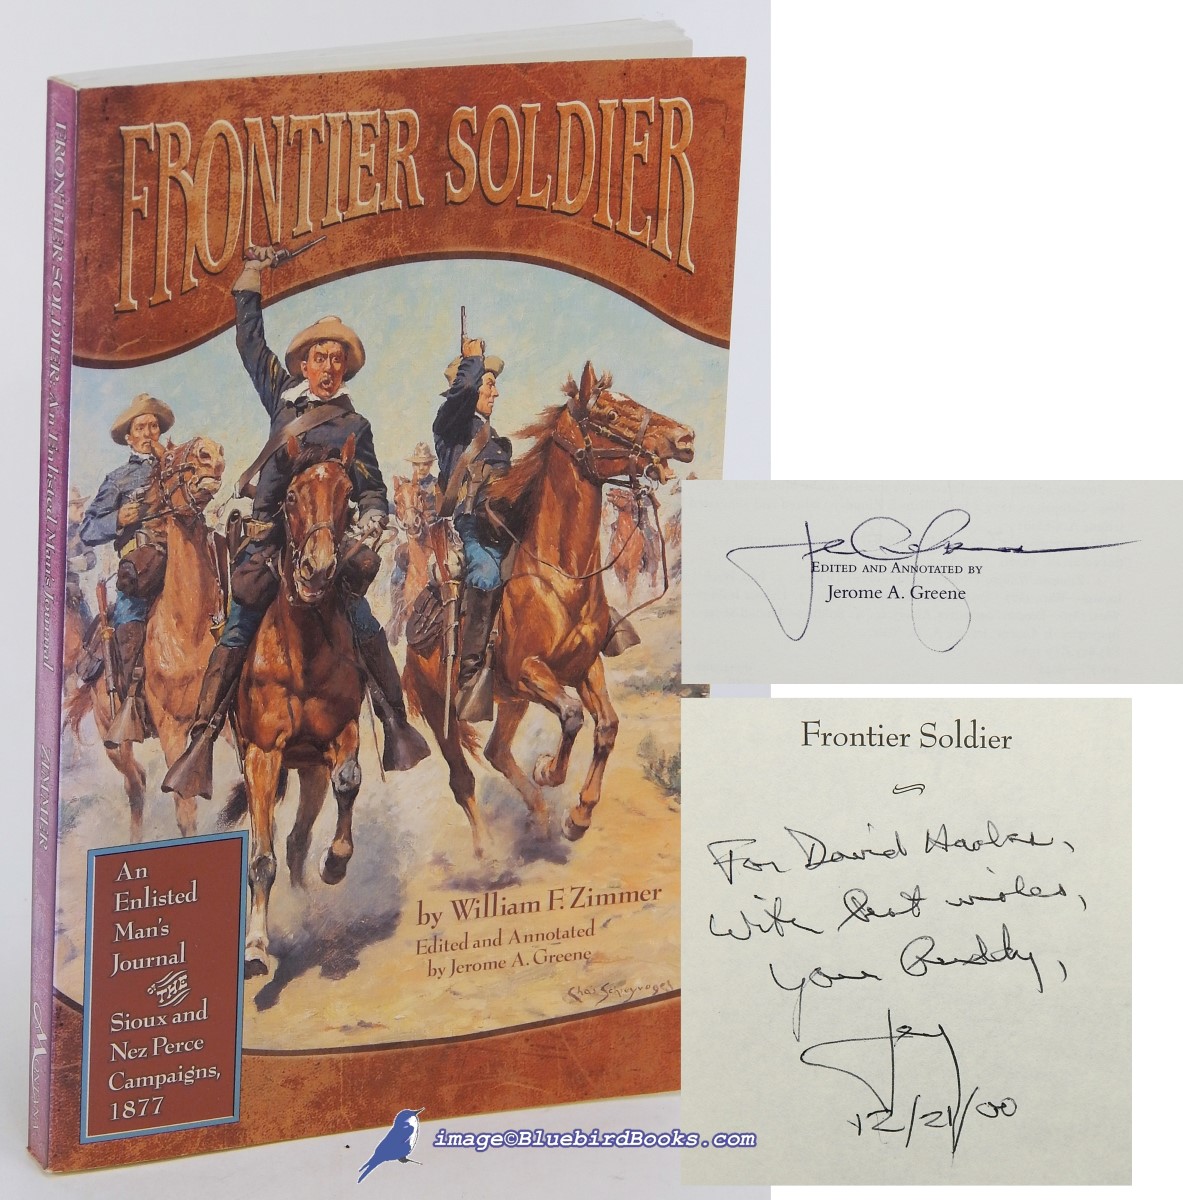 ZIMMER, WILLIAM F. (AUTHOR); GREENE, JEROME A. (EDITOR AND ANNOTATOR) - Frontier Soldier: An Enlisted Man's Journal of the Sioux and Nez Perce Campaigns, 1877